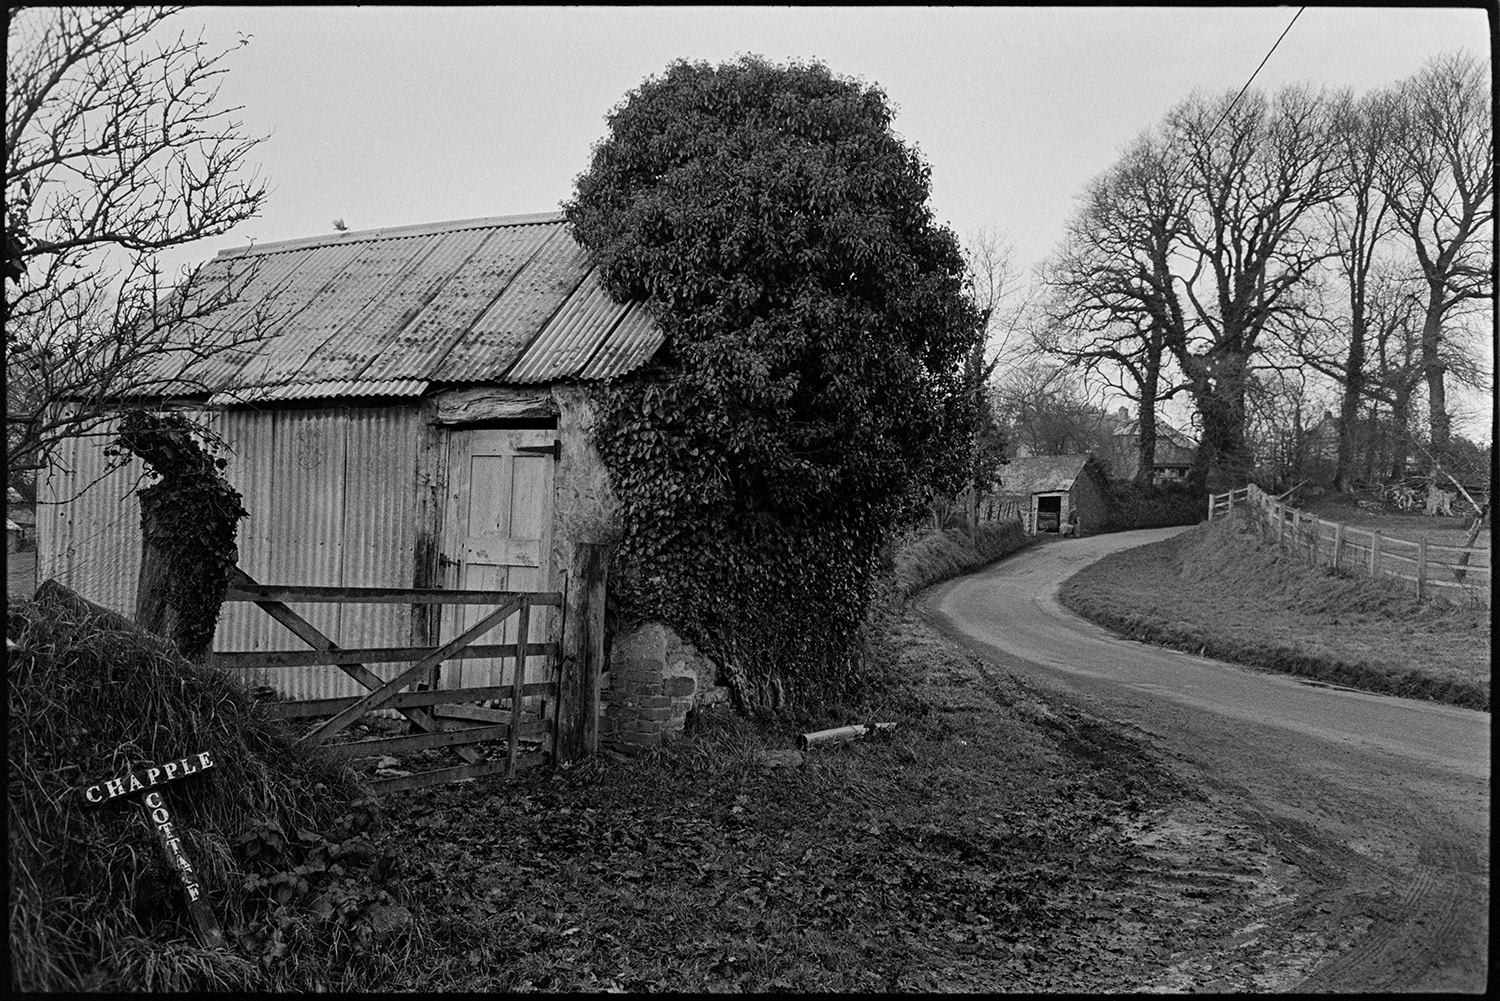 Old cob barn with corrugated iron, now demolished.
[Old cob barn with corrugated iron walls and roof, and a wooden door, at Lower Langham, Dolton. The barn is behind a wooden field gate and a sign for Chapple Cottage. Other buildings and trees are visible in the background further along the road. The barn has now been demolished.]